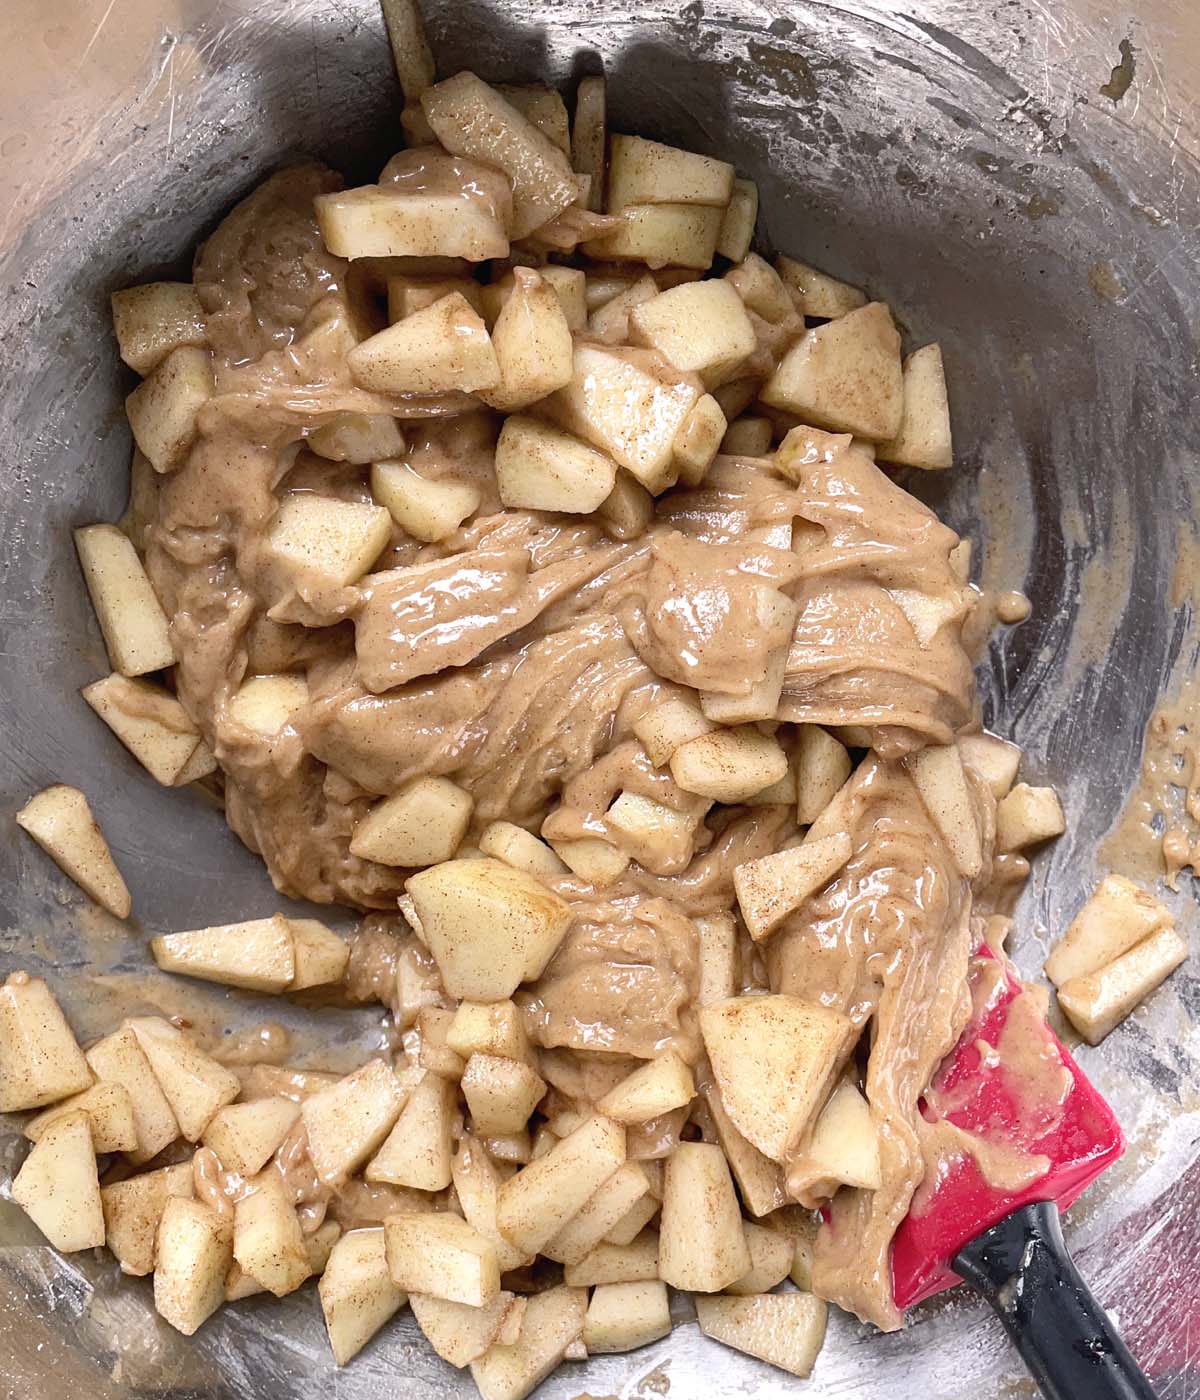 Diced apples being mixed into a light brown batter in a bowl.